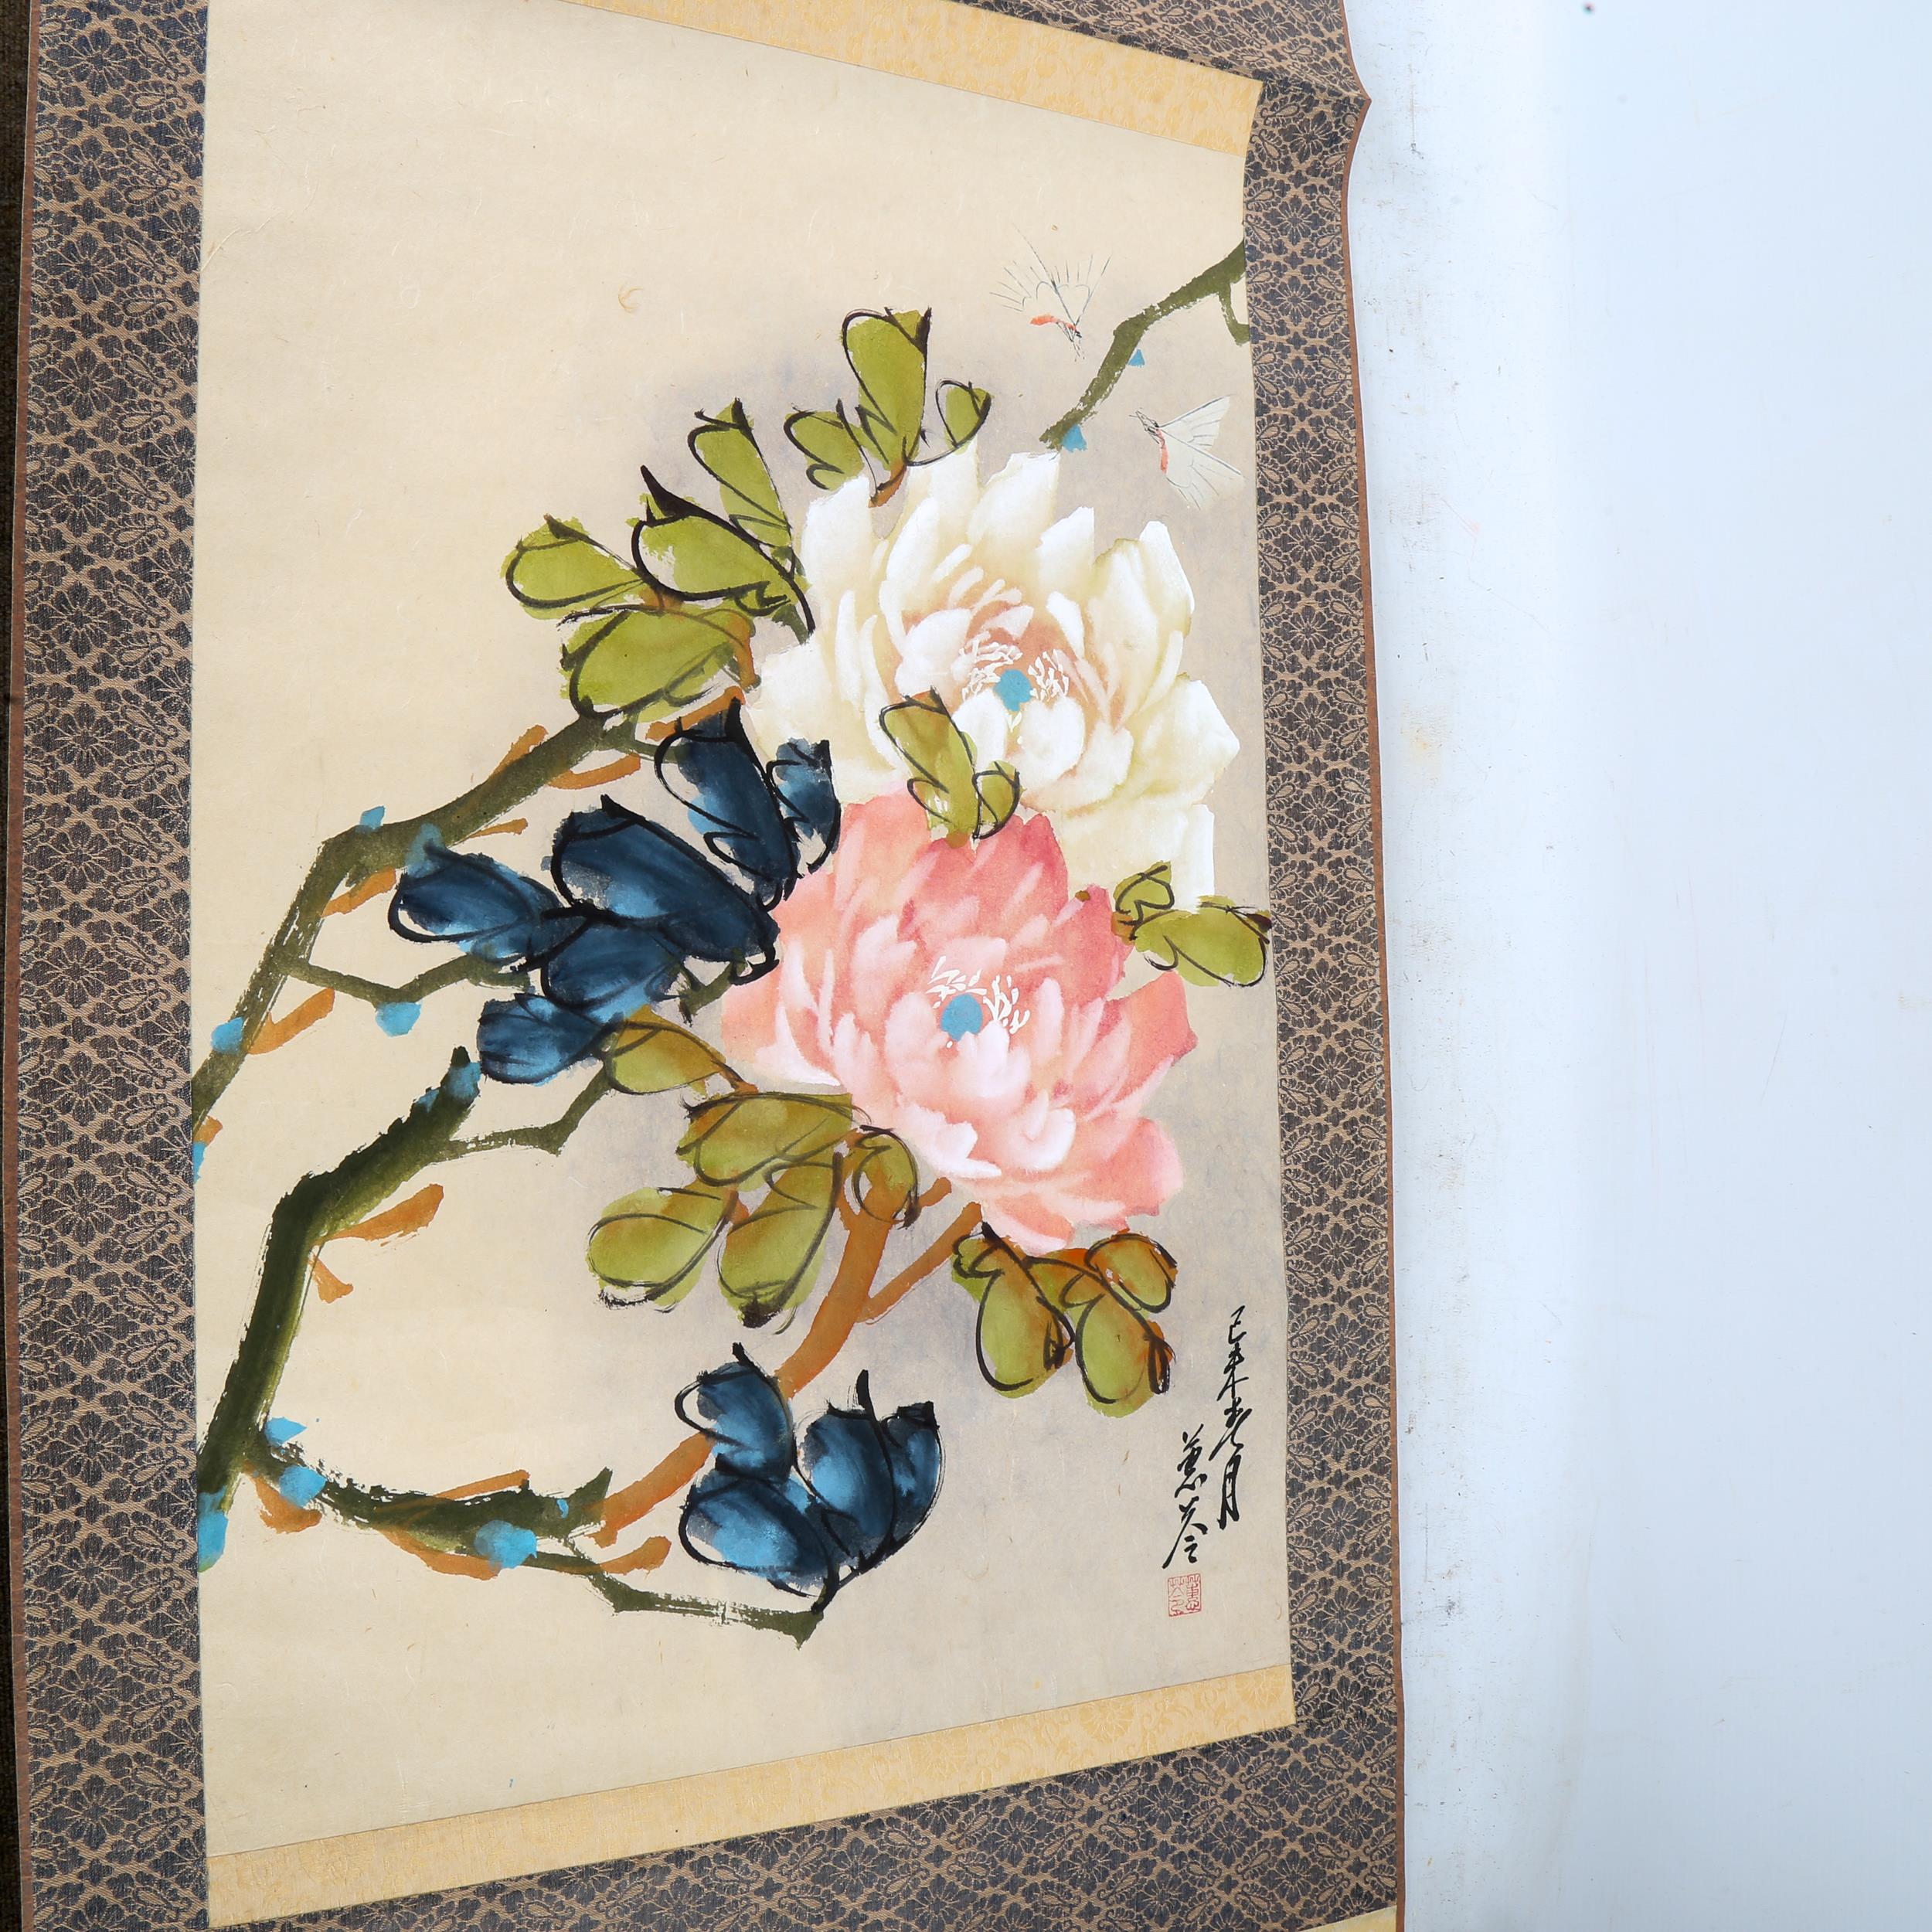 Chinese School, watercolour scroll painting, sign with chop and text inscription, image 62cm x 21cm, - Image 4 of 4